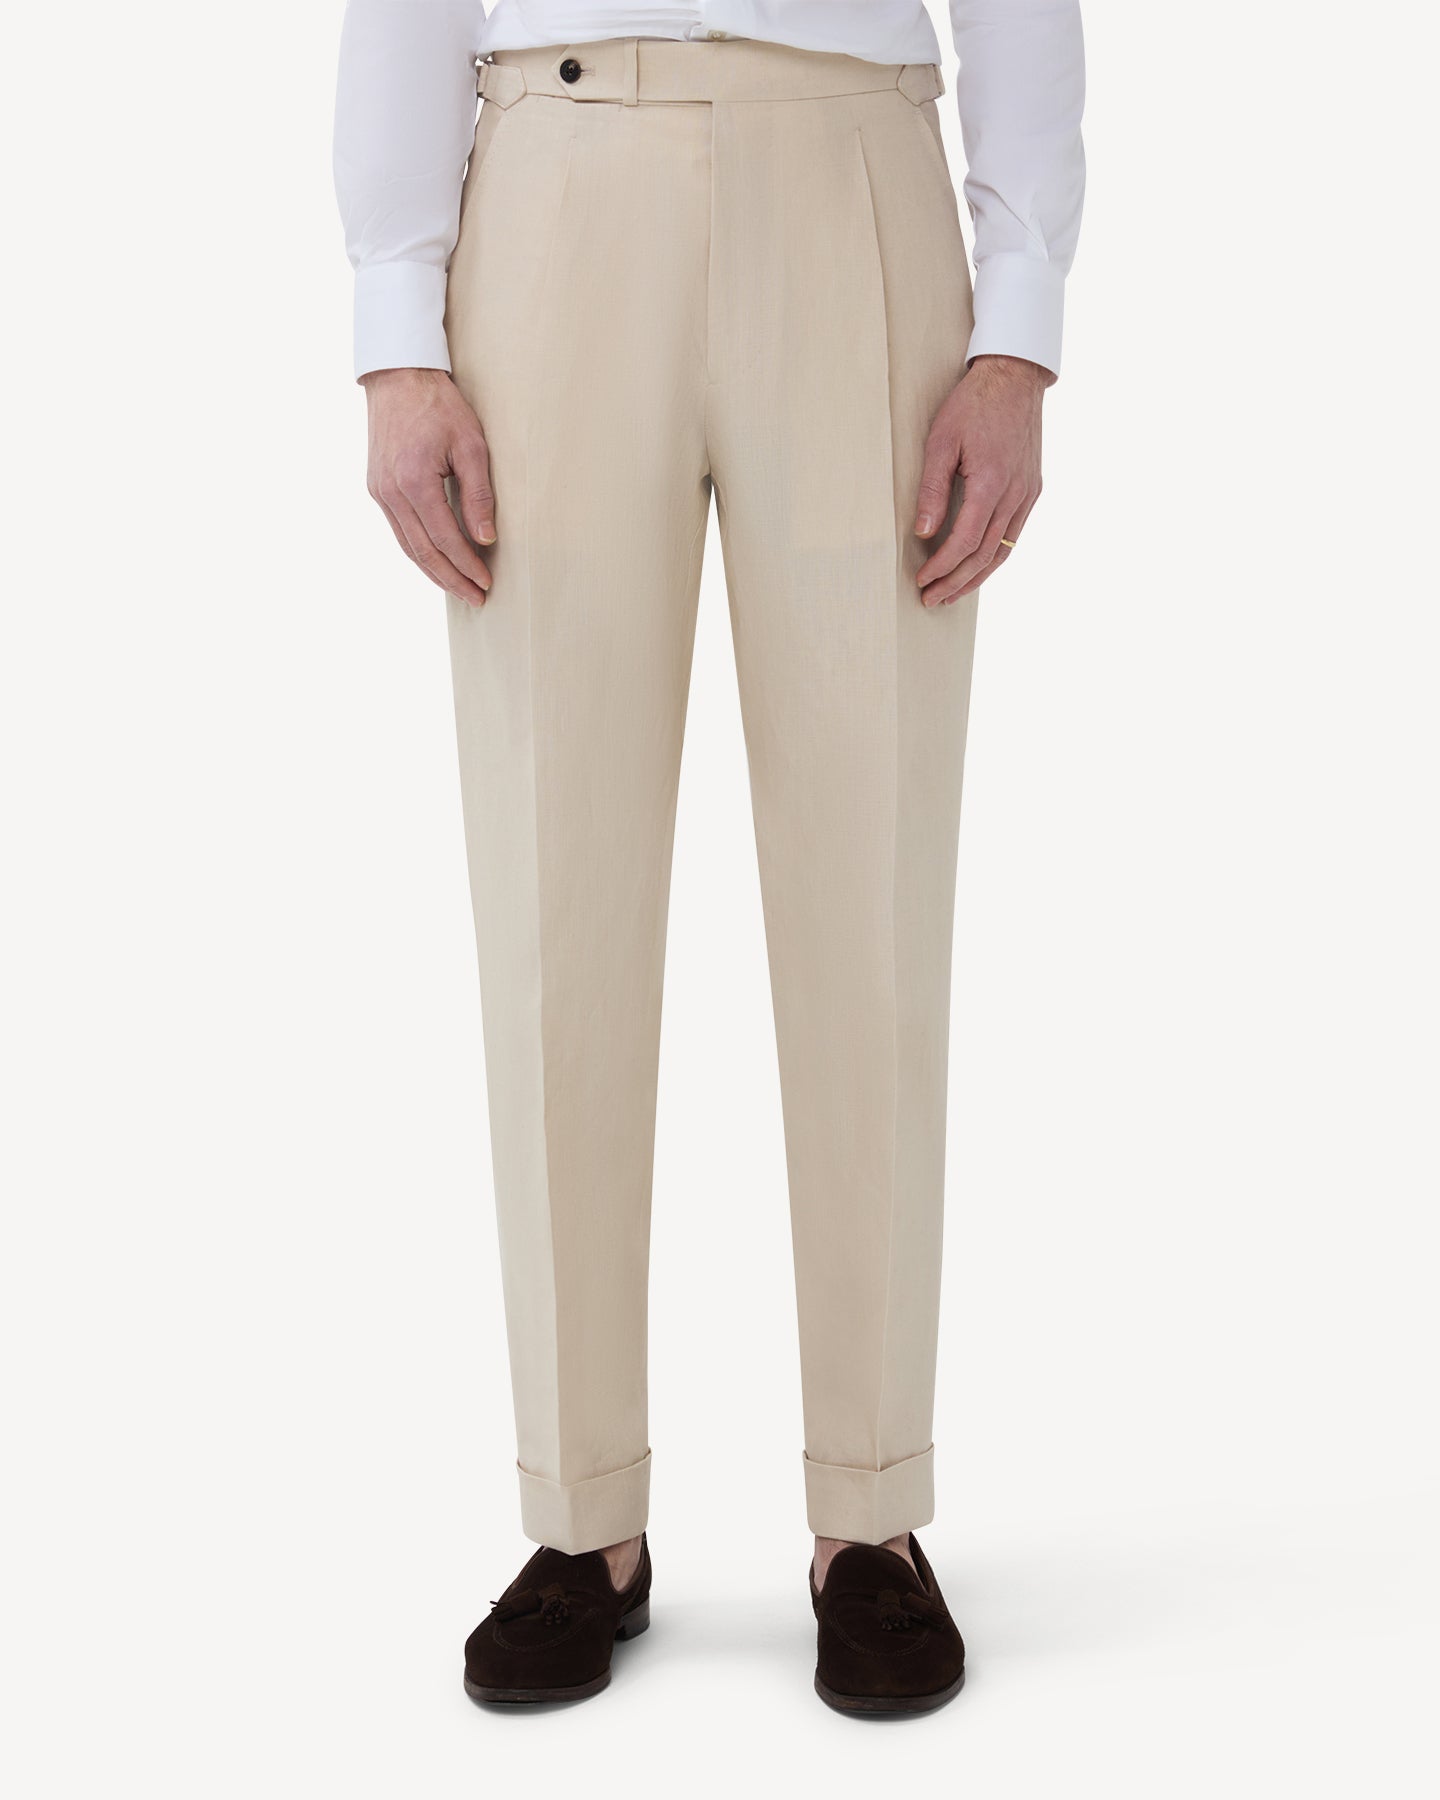 The front of stone linen trousers with single pleats and side adjusters